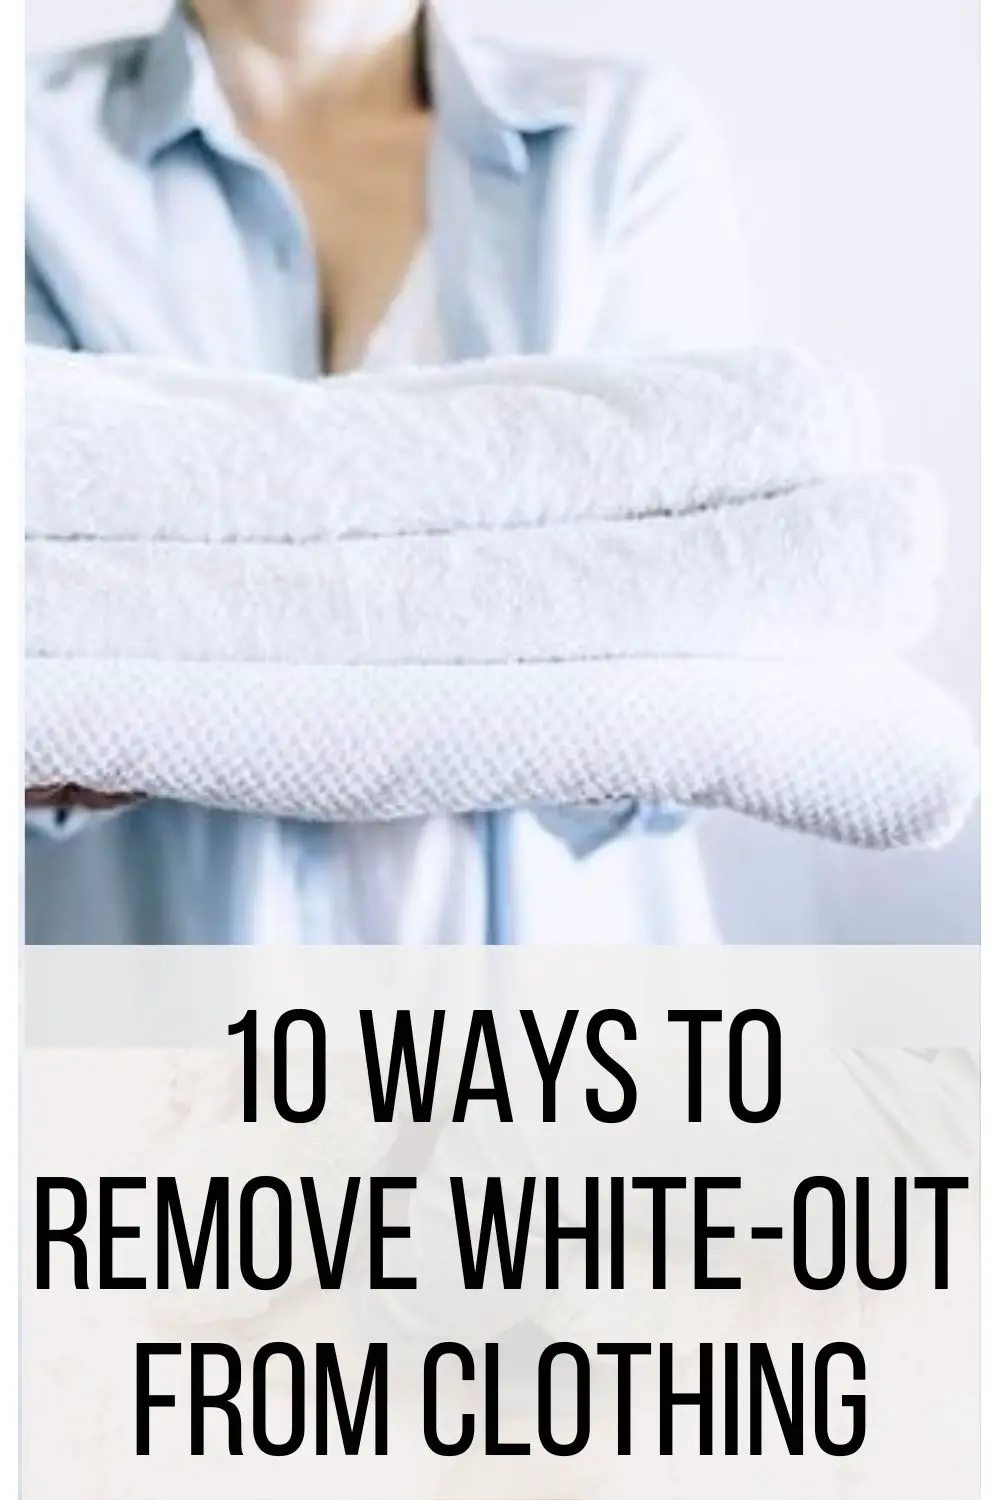 10 Ways to Remove White-Out from Clothing